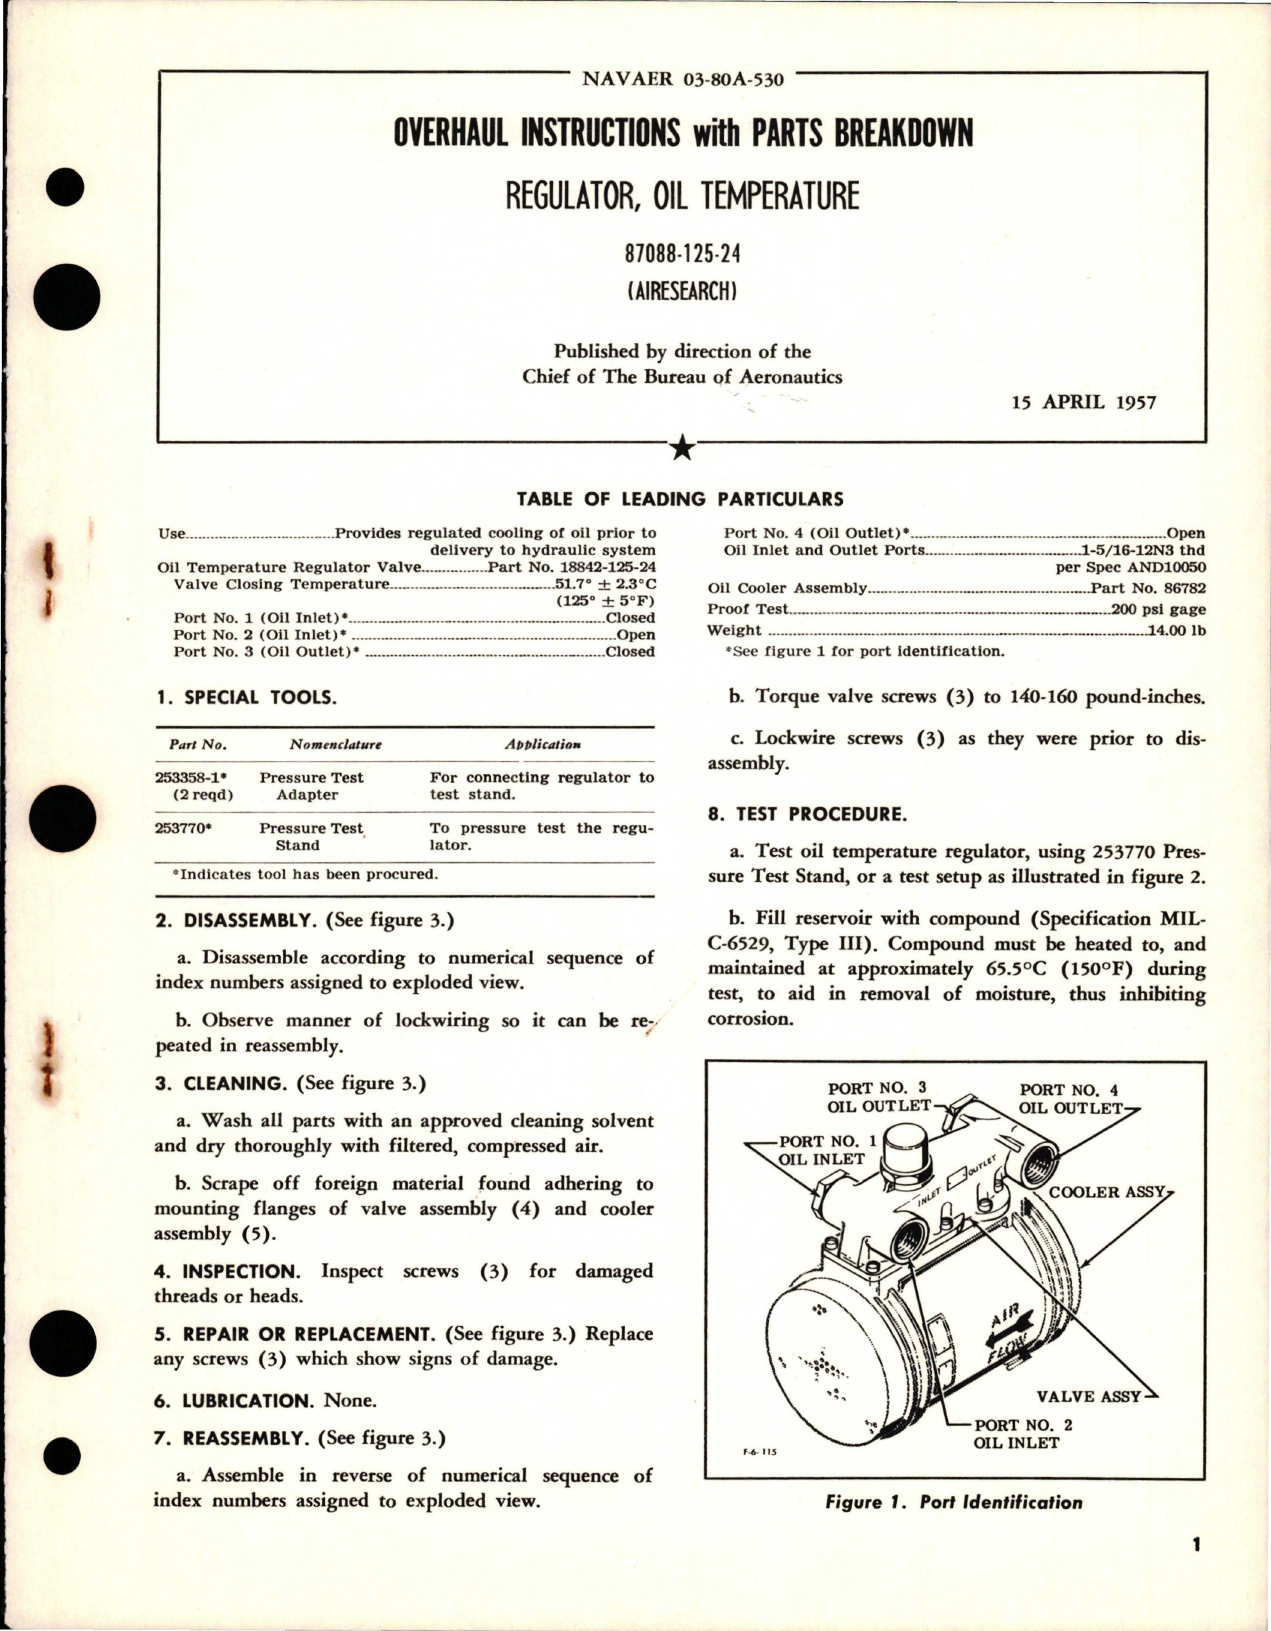 Sample page 1 from AirCorps Library document: Overhaul Instructions with Parts Breakdown for Oil Temperature Regulator - 87088-125-24 